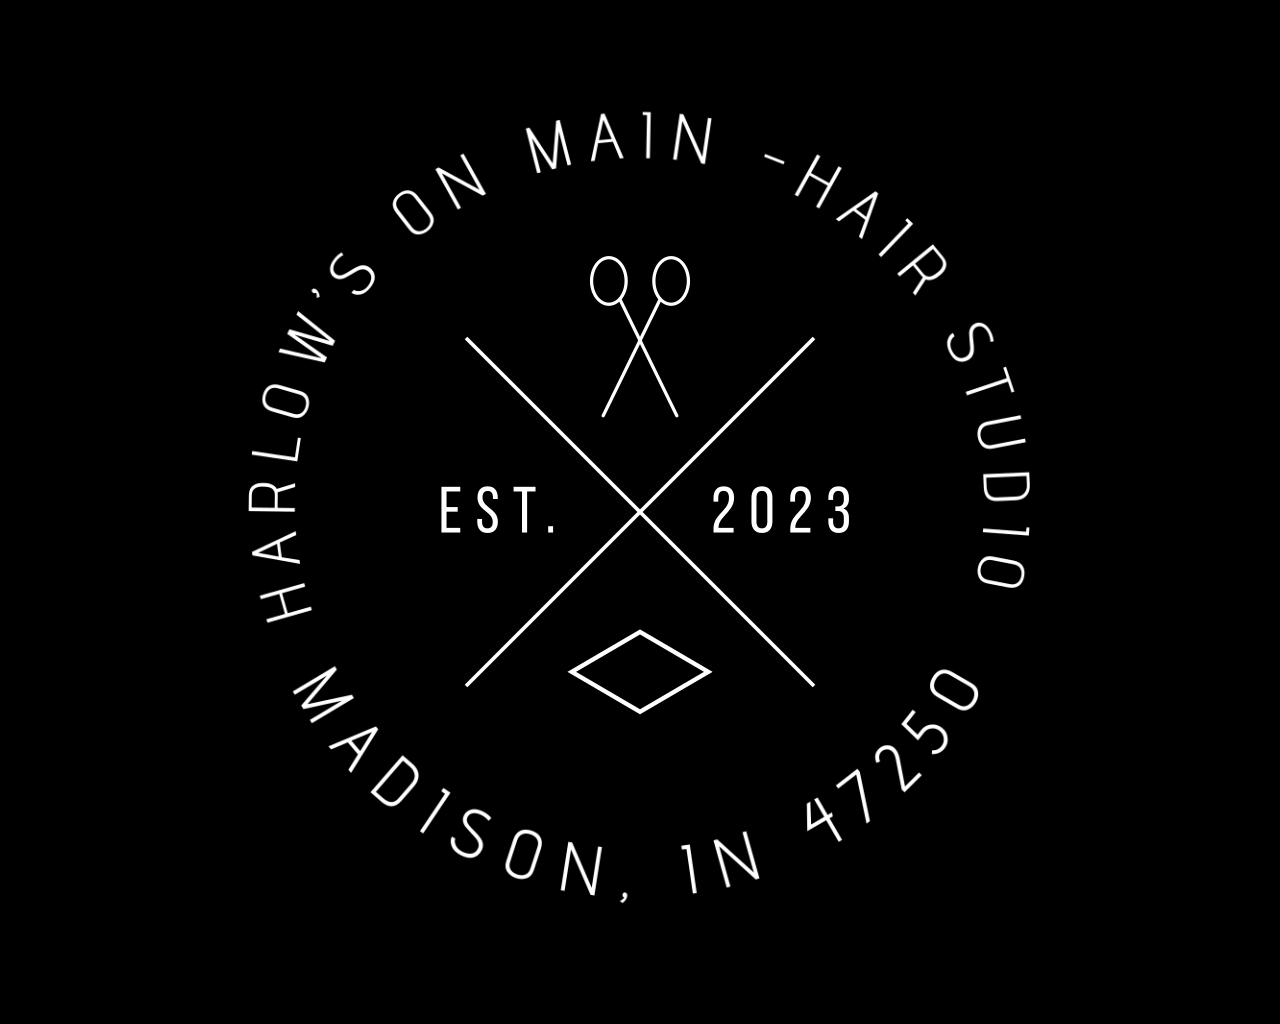 A logo for harlow 's on main hair studio in madison